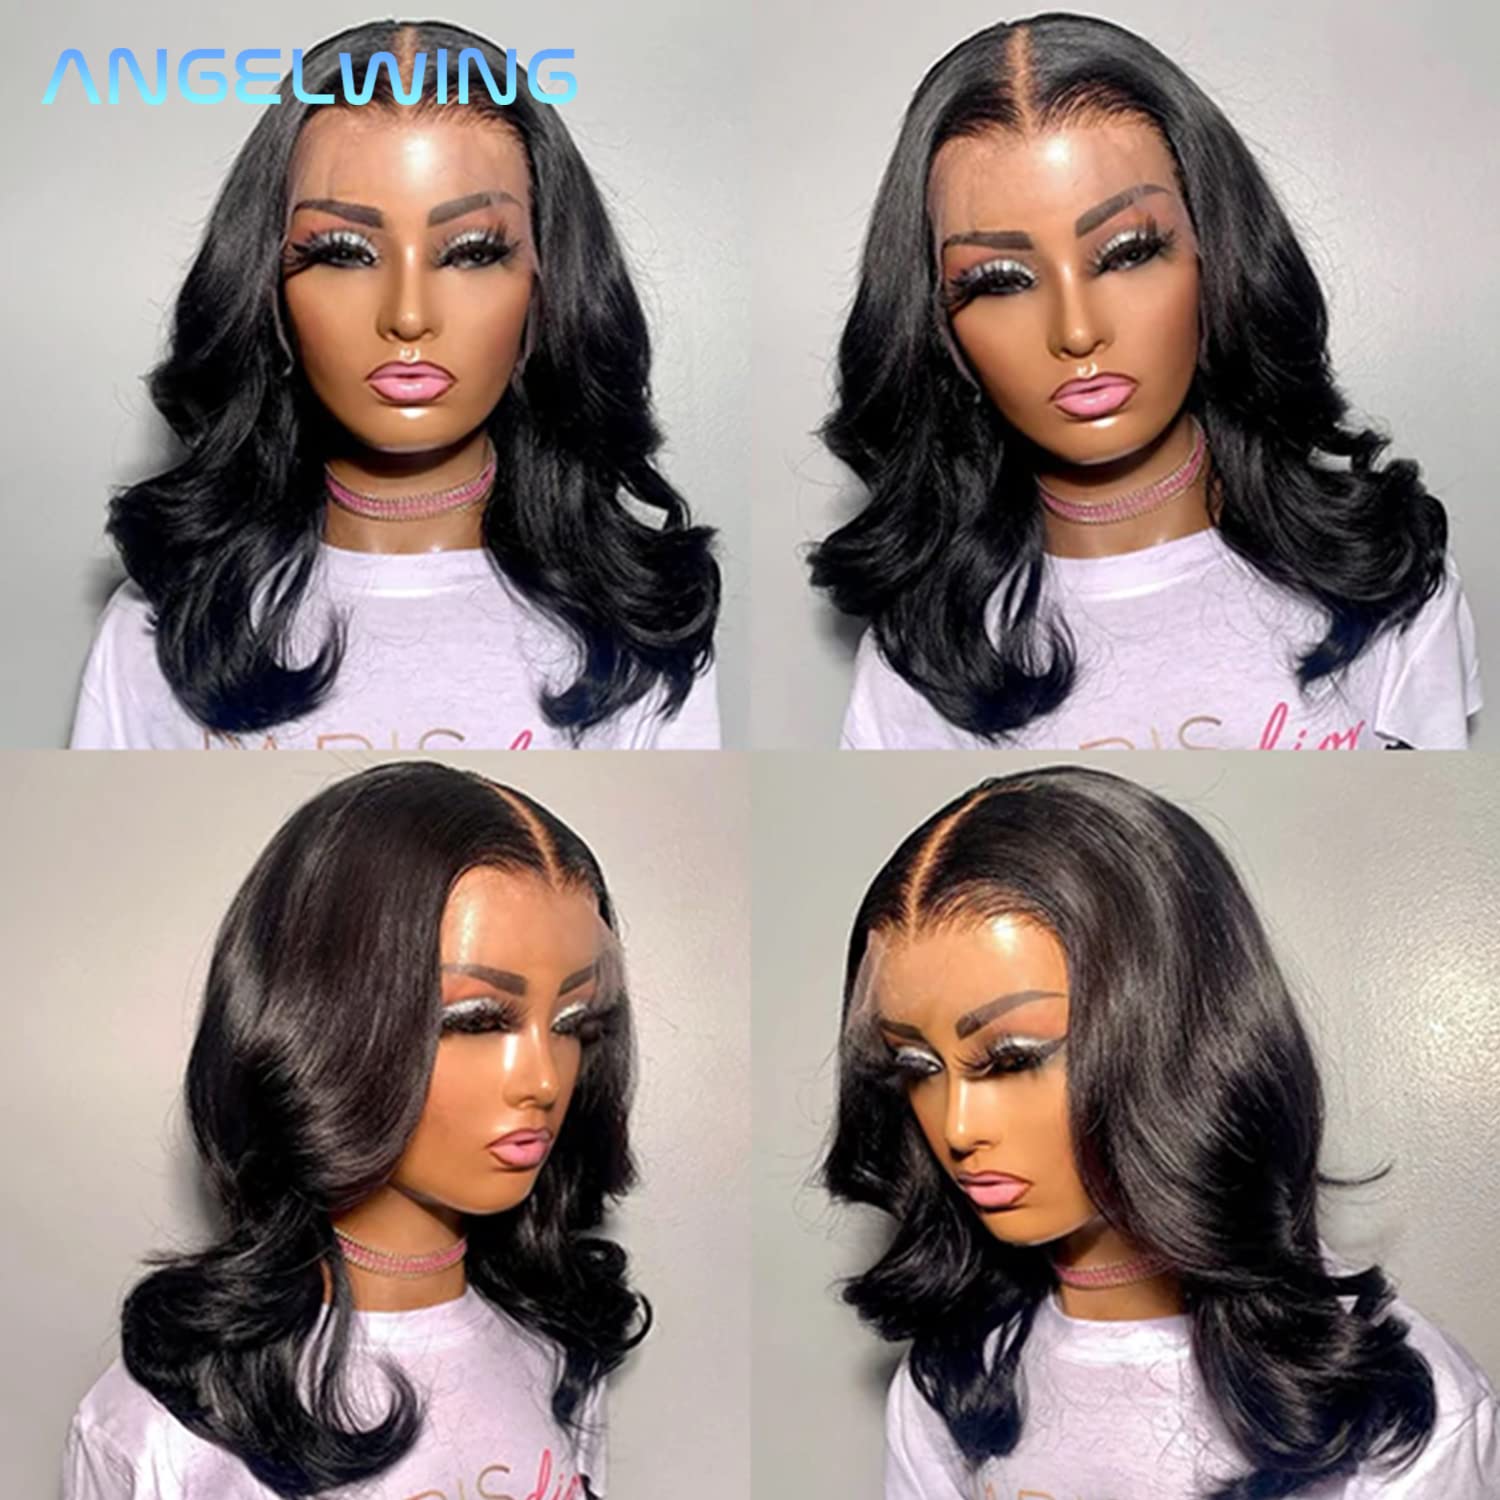 26 Inch Body Wave Frontal Wigs Human Hair HD Lace Front Wigs Human Hair  13x4 Body Wave Lace Frontal Wig 150% Density Pre Plucked Lace Front Wigs  for Black Women Human Hair